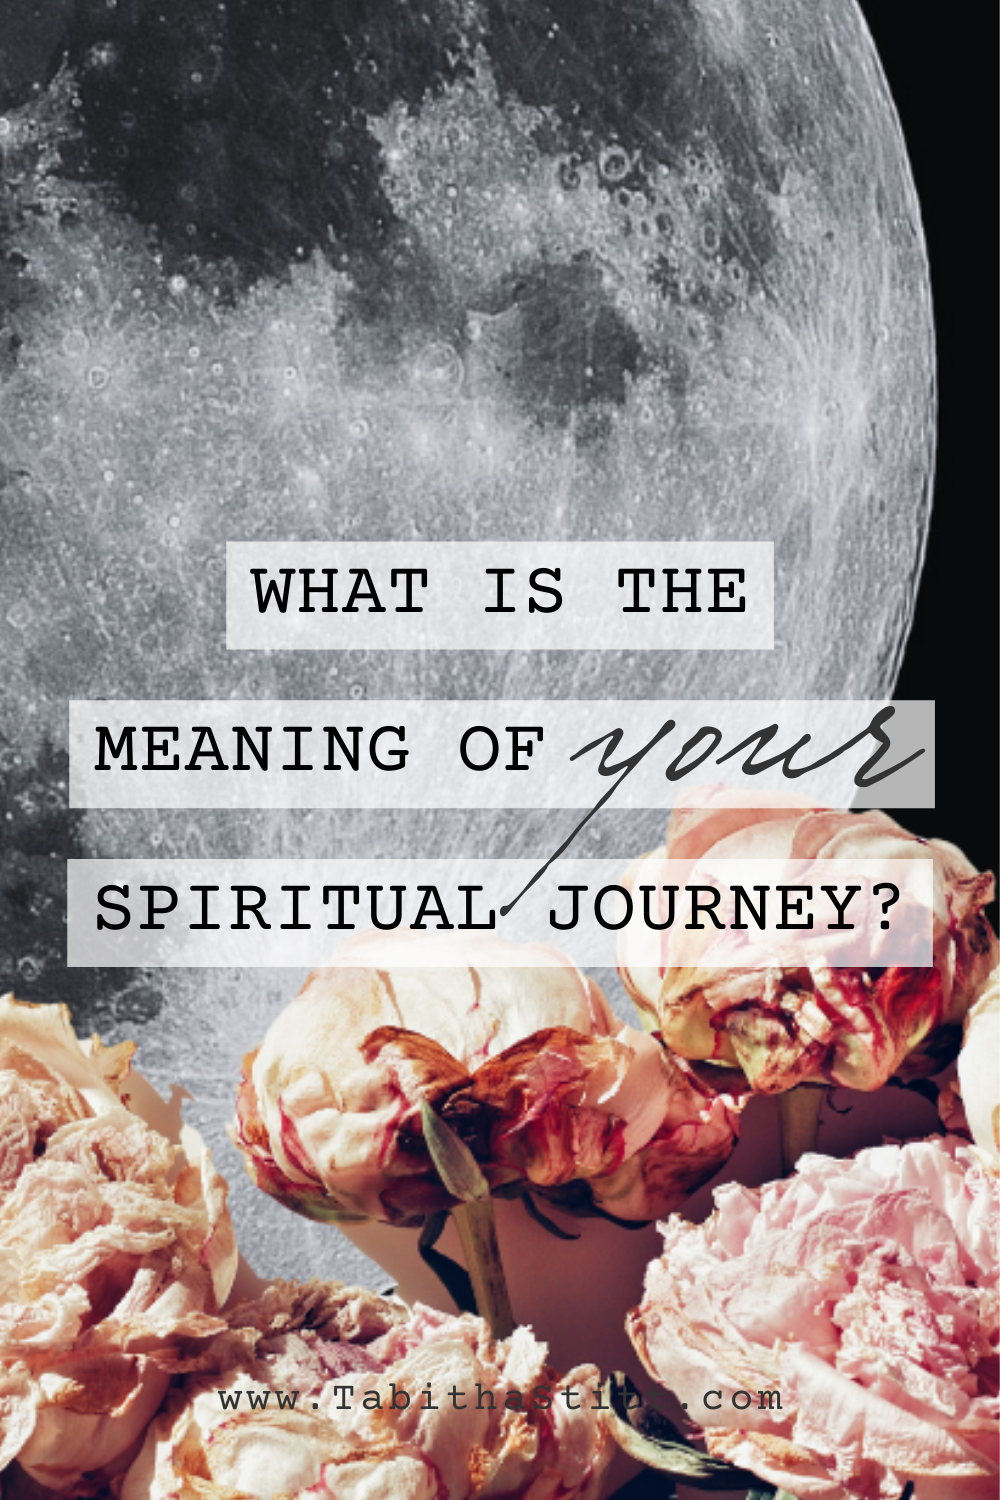 What Is The Purpose of Your Spiritual Journey? with the moon and pink flowers for transformation